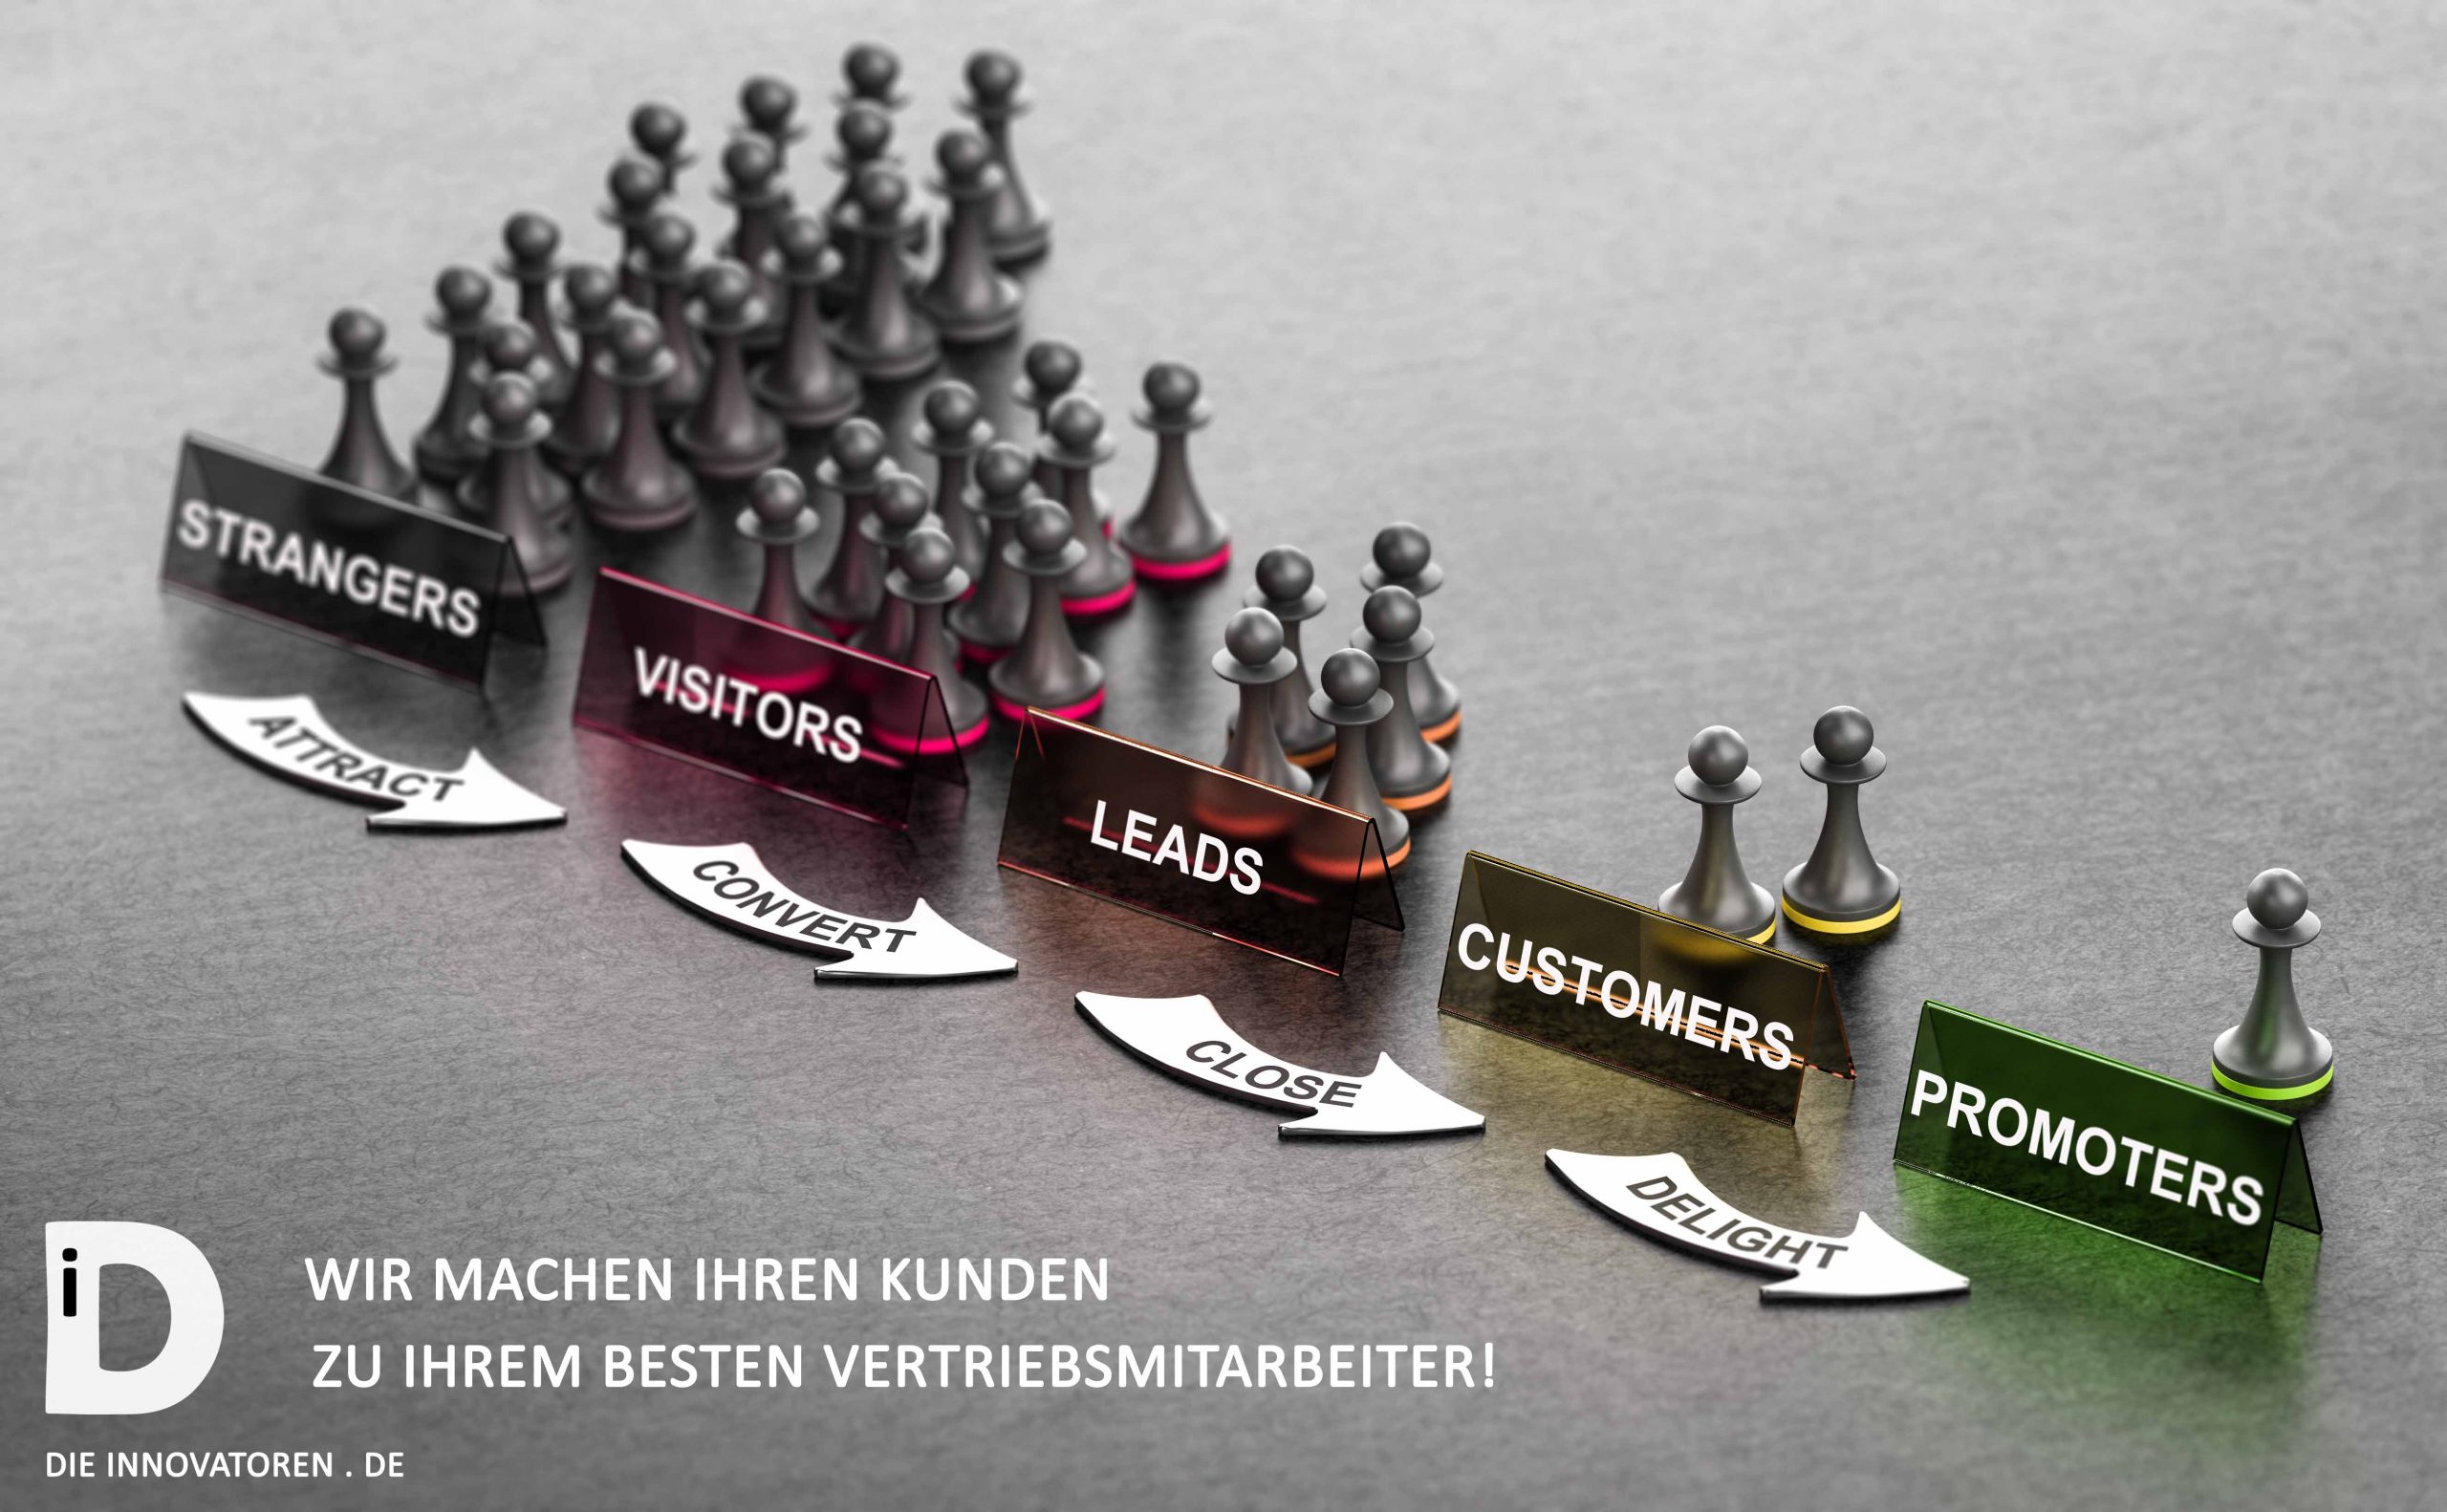 Inbound Marketing Principles over black background with pawns signs and arrows. Stages from stranger to promoter. 3D illustration